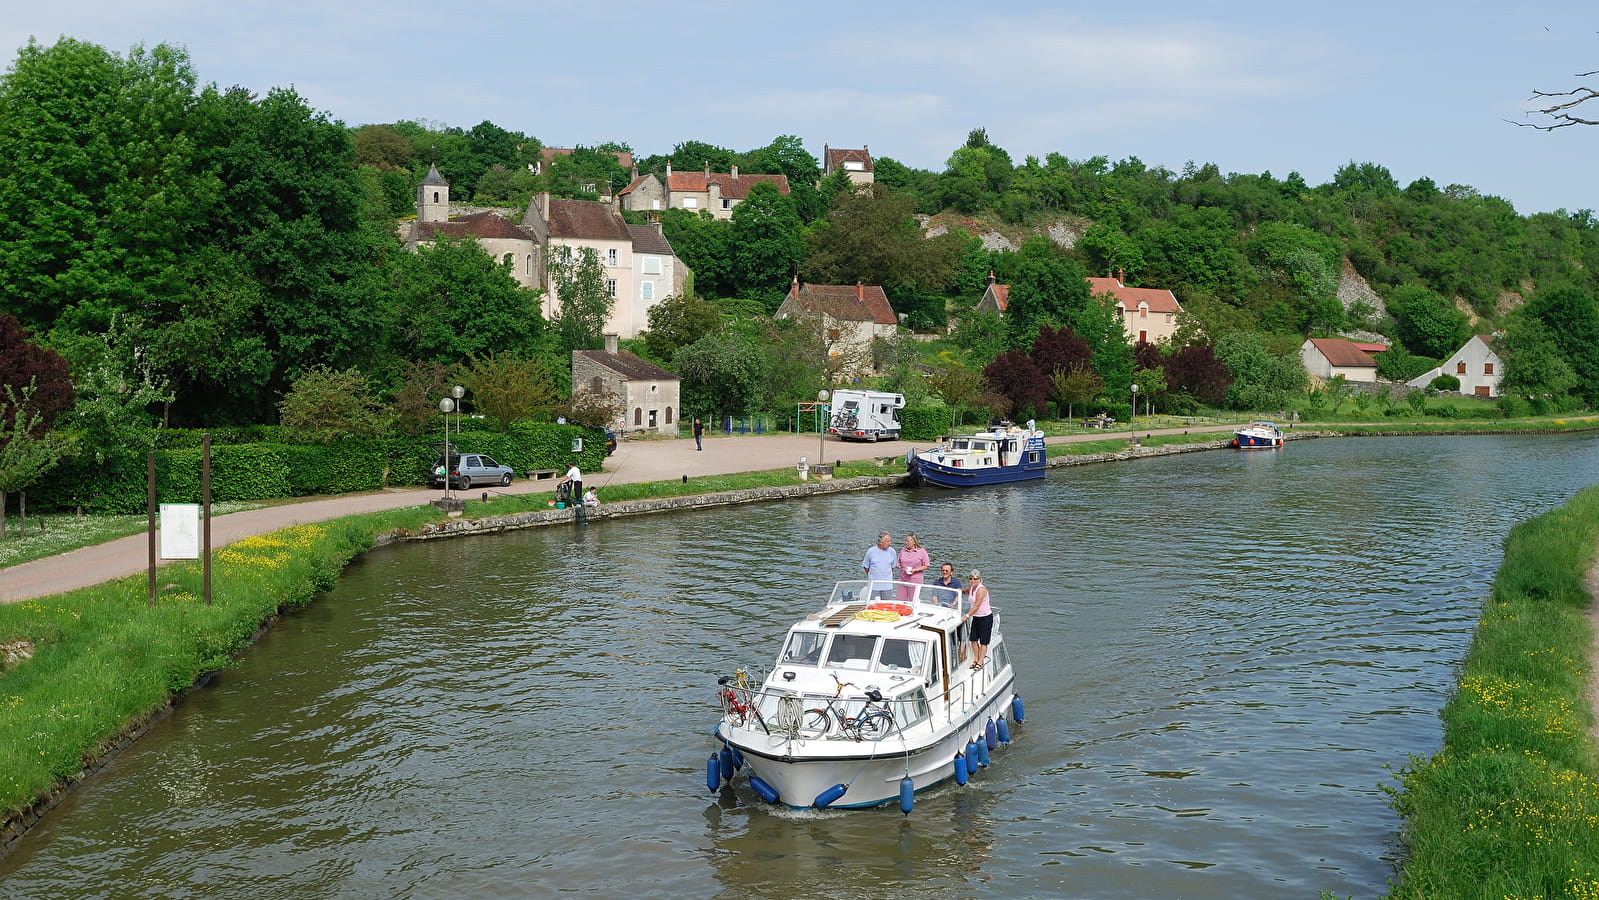 The Yonne meander circuit